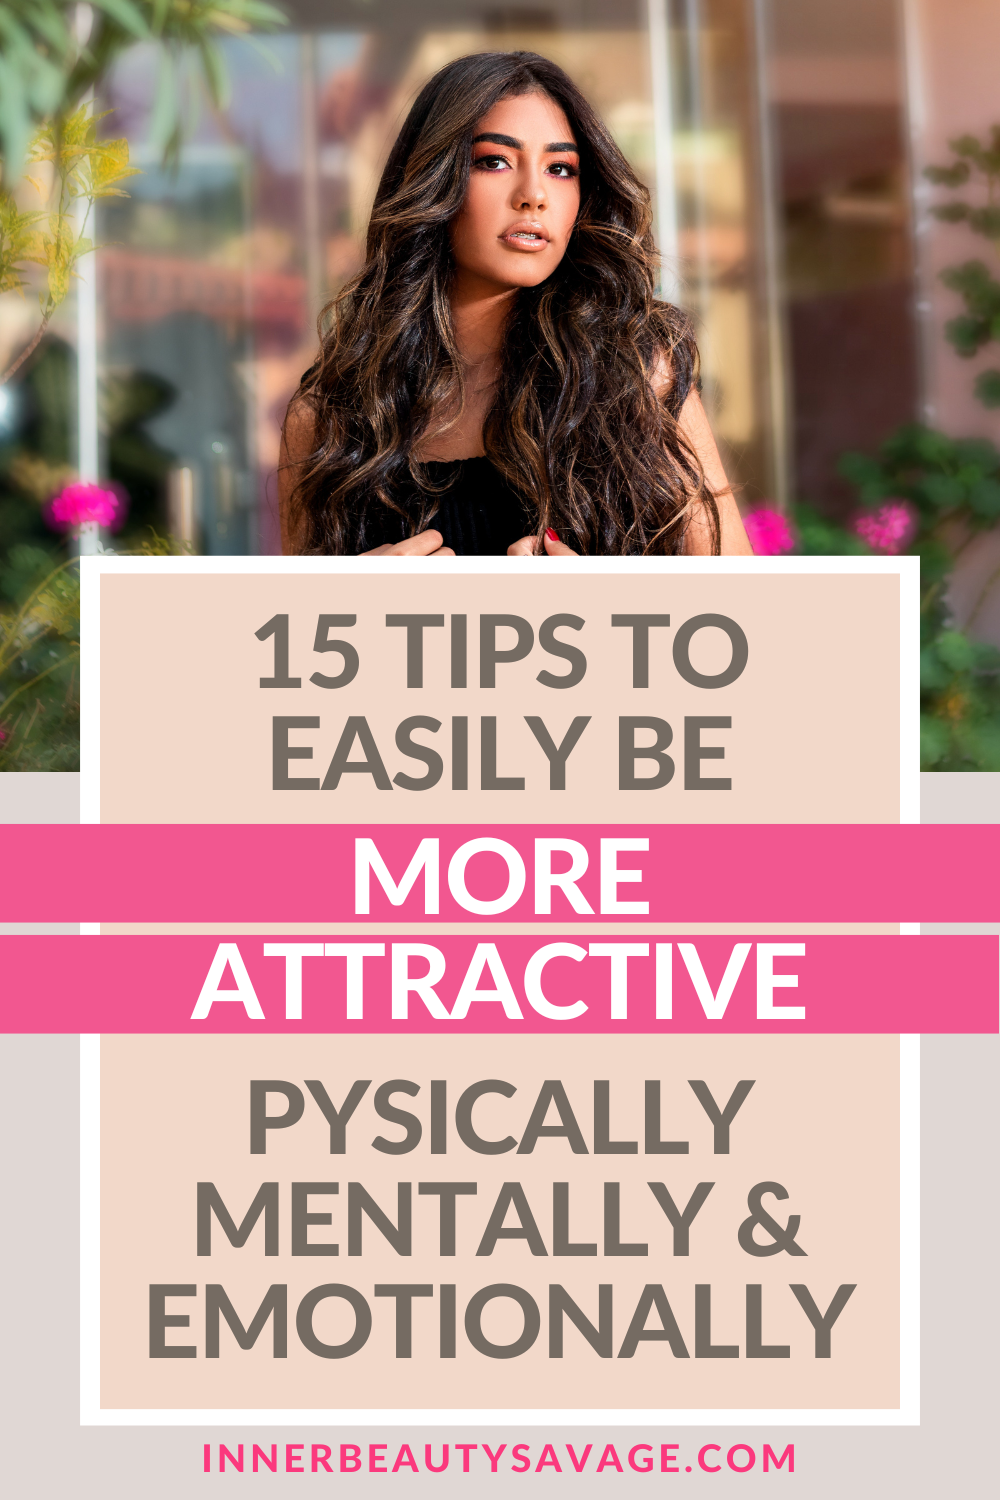 Blog Image on Tips to be more attractive